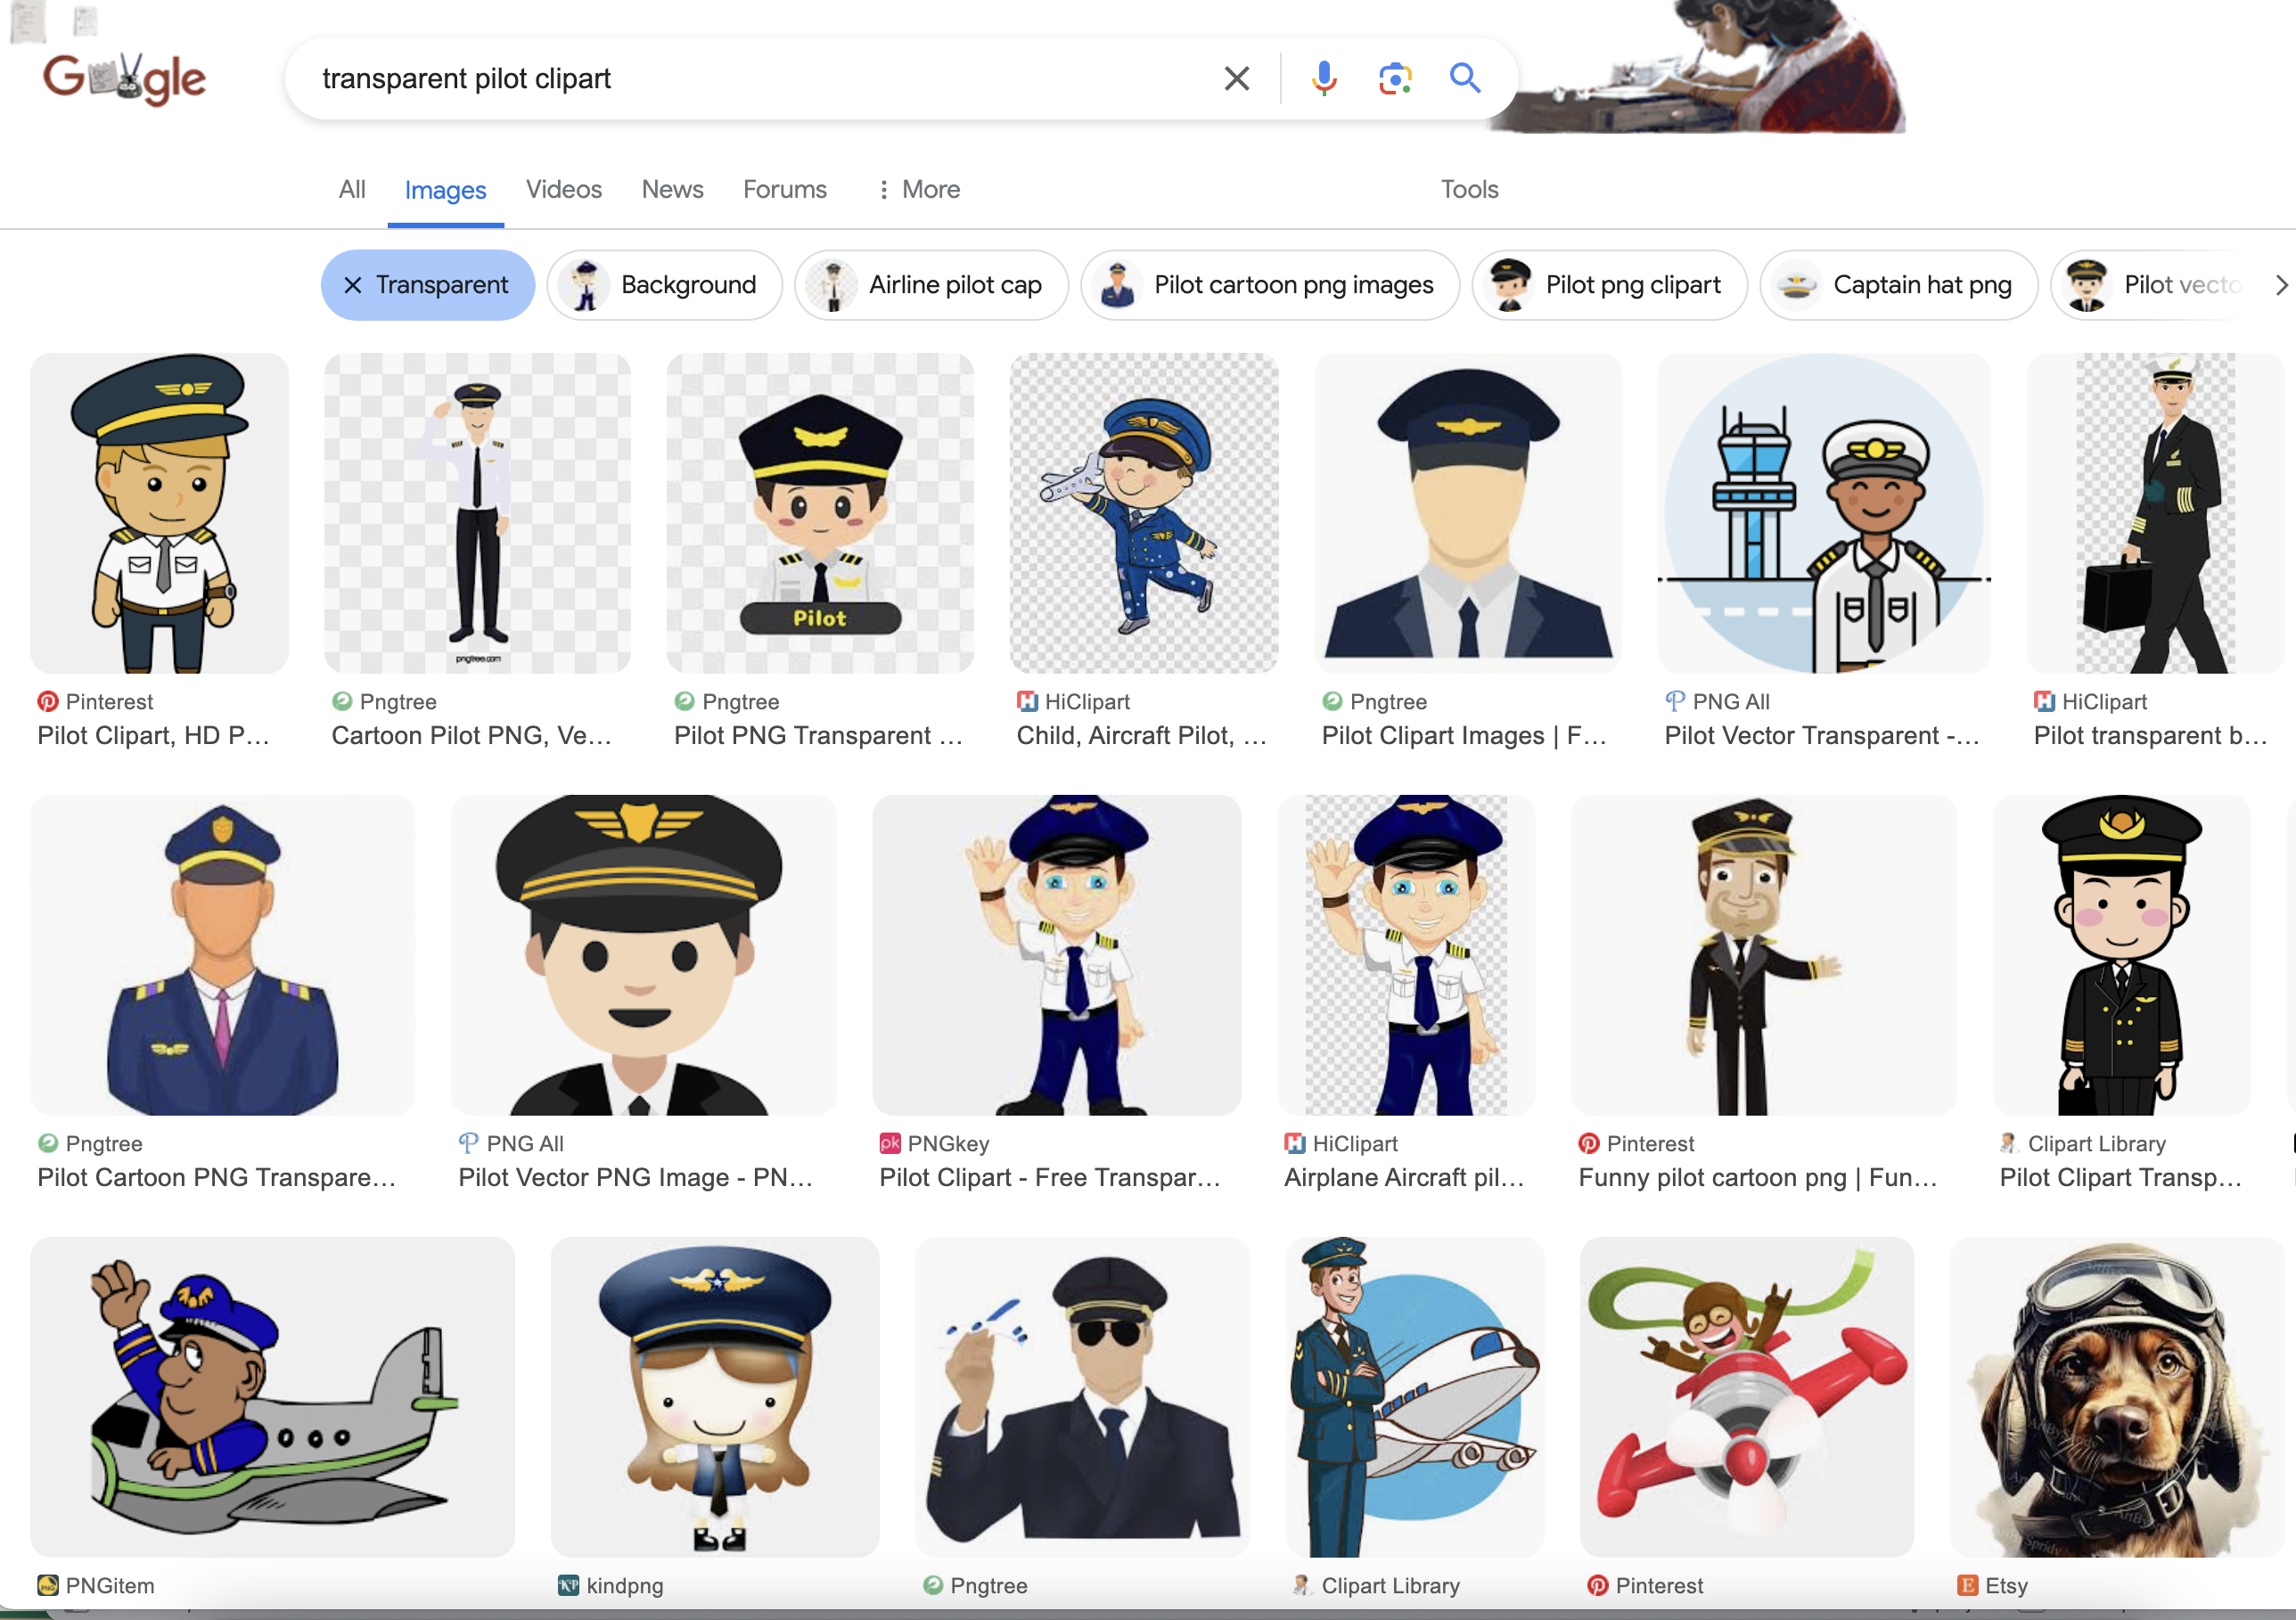 Screenshot of top google image search results for transparent pilot clipart